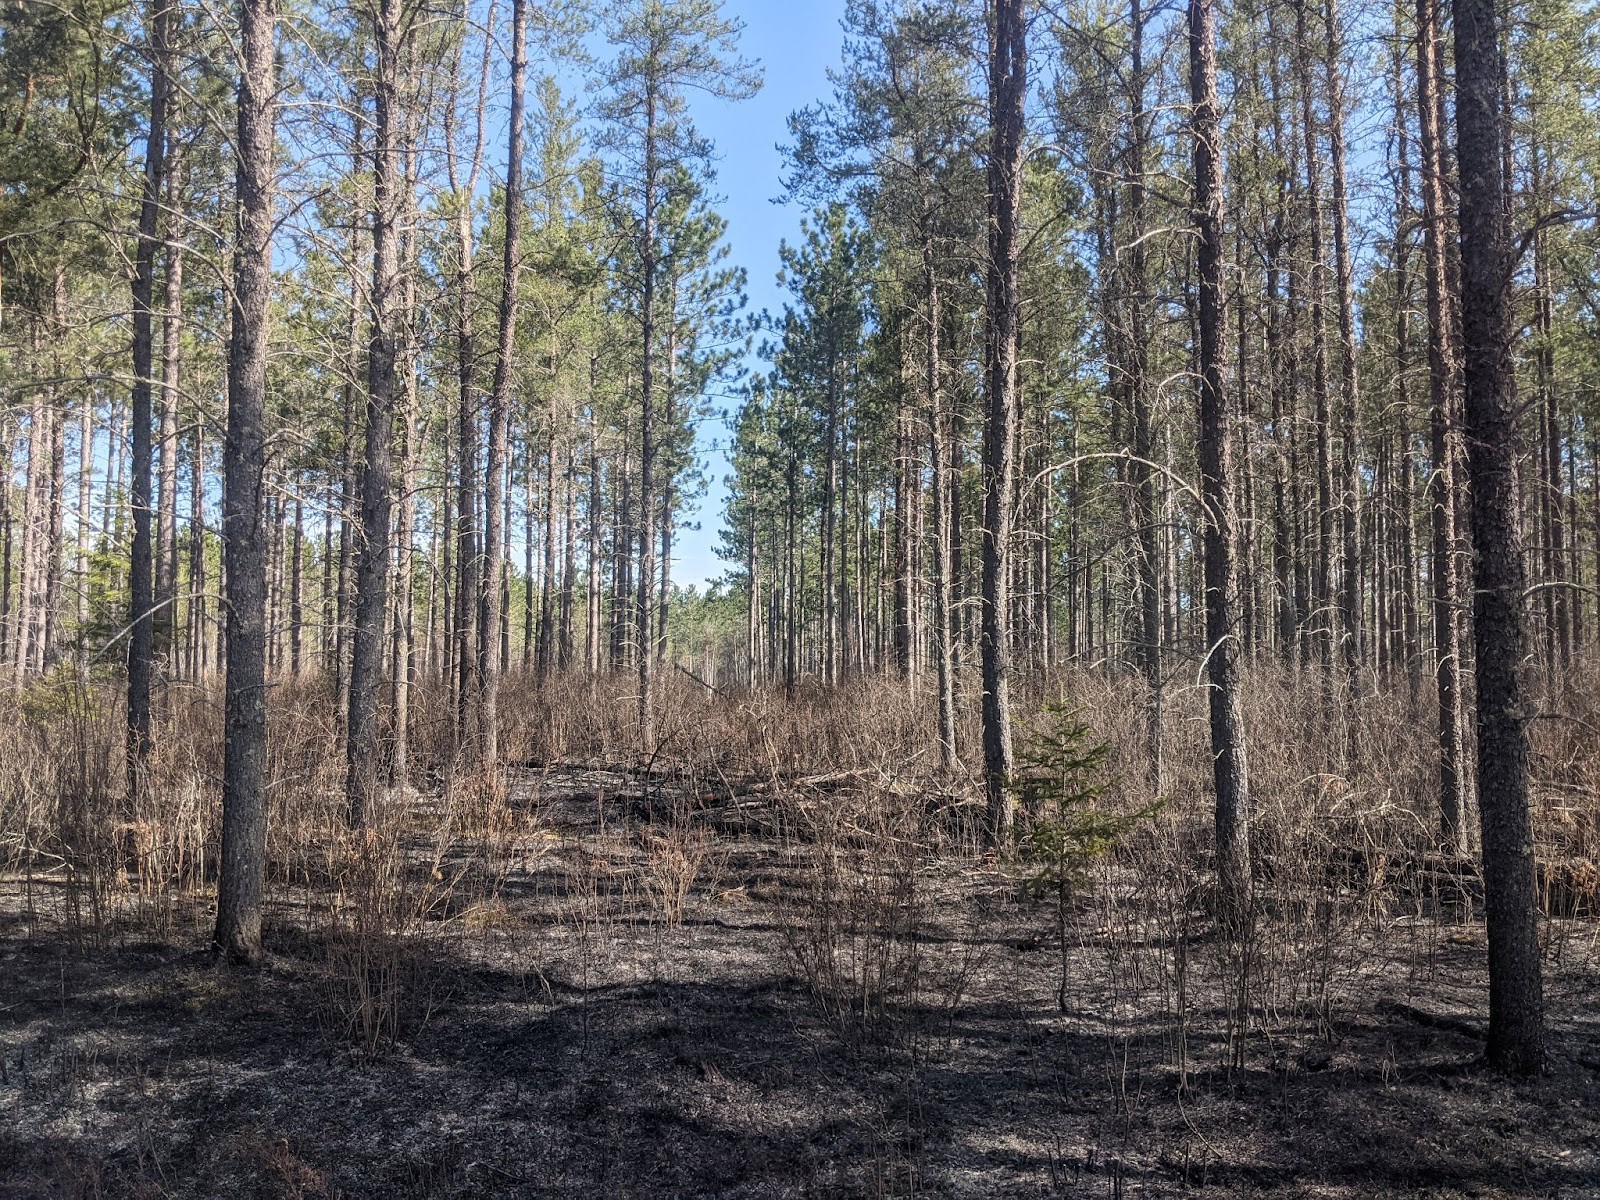 The Otter Creek unit on May 18, 2022, one day after conducting the prescribed burn showing the immediate post-burn conditions. Understory balsam fir that did not torch up and die immediately, like the one in the right foreground, were dead by the end of the growing season. Photo by Kyle Gill.